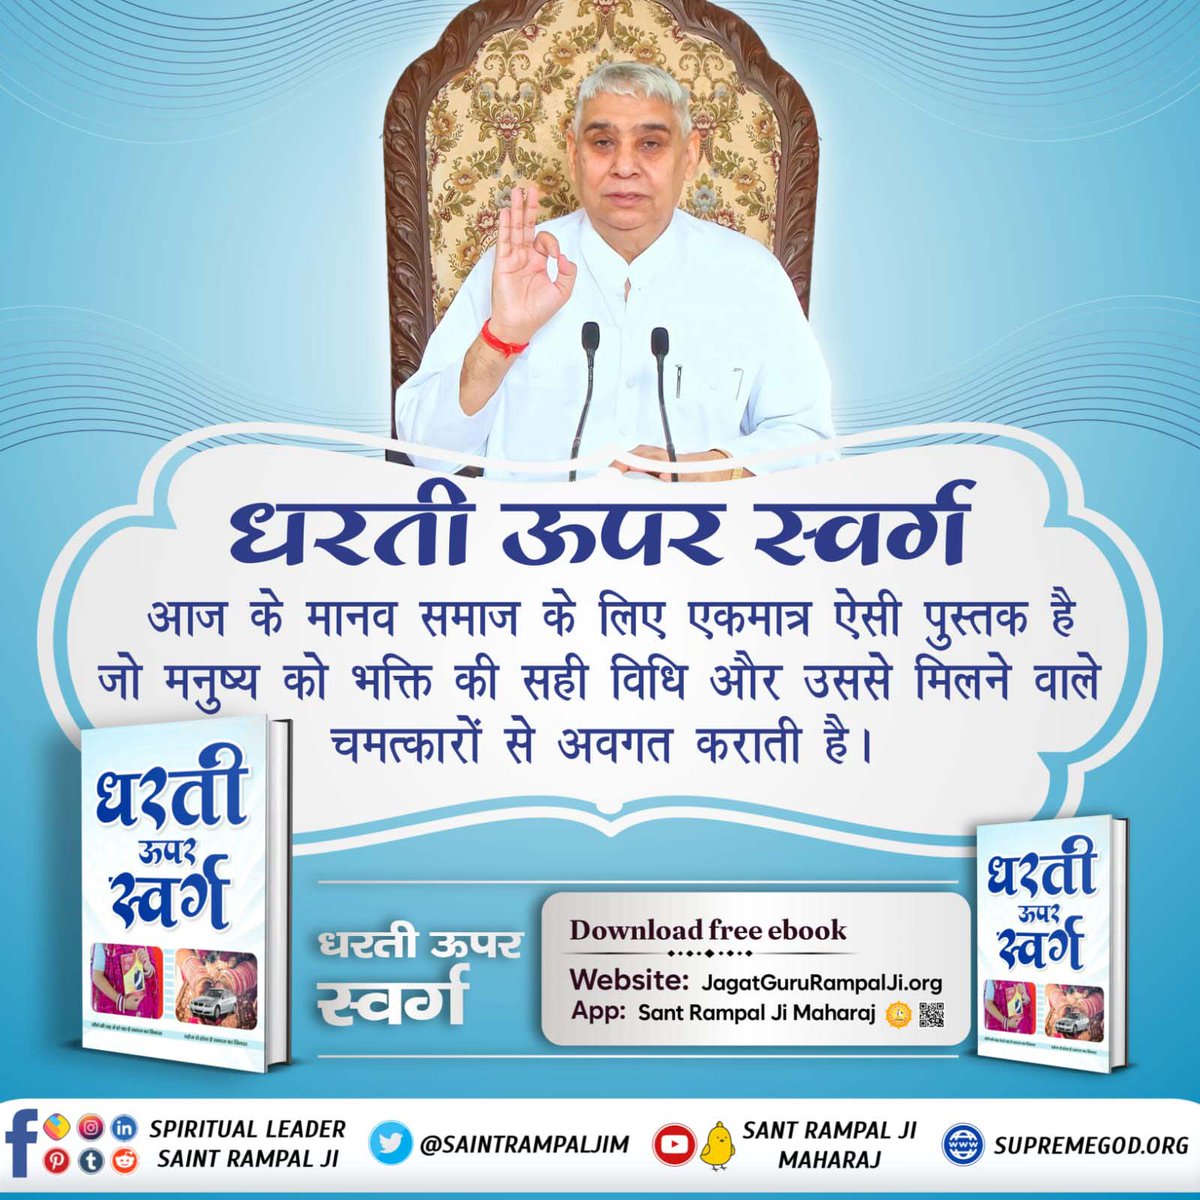 #धरती_को_स्वर्ग_बनाना_है

After hearing the thoughts of Sant Rampal Ji Maharaj, no one can ever consider either giving or taking dowry, the logic is so hard-hitting.
Sant Rampal Ji Maharaj